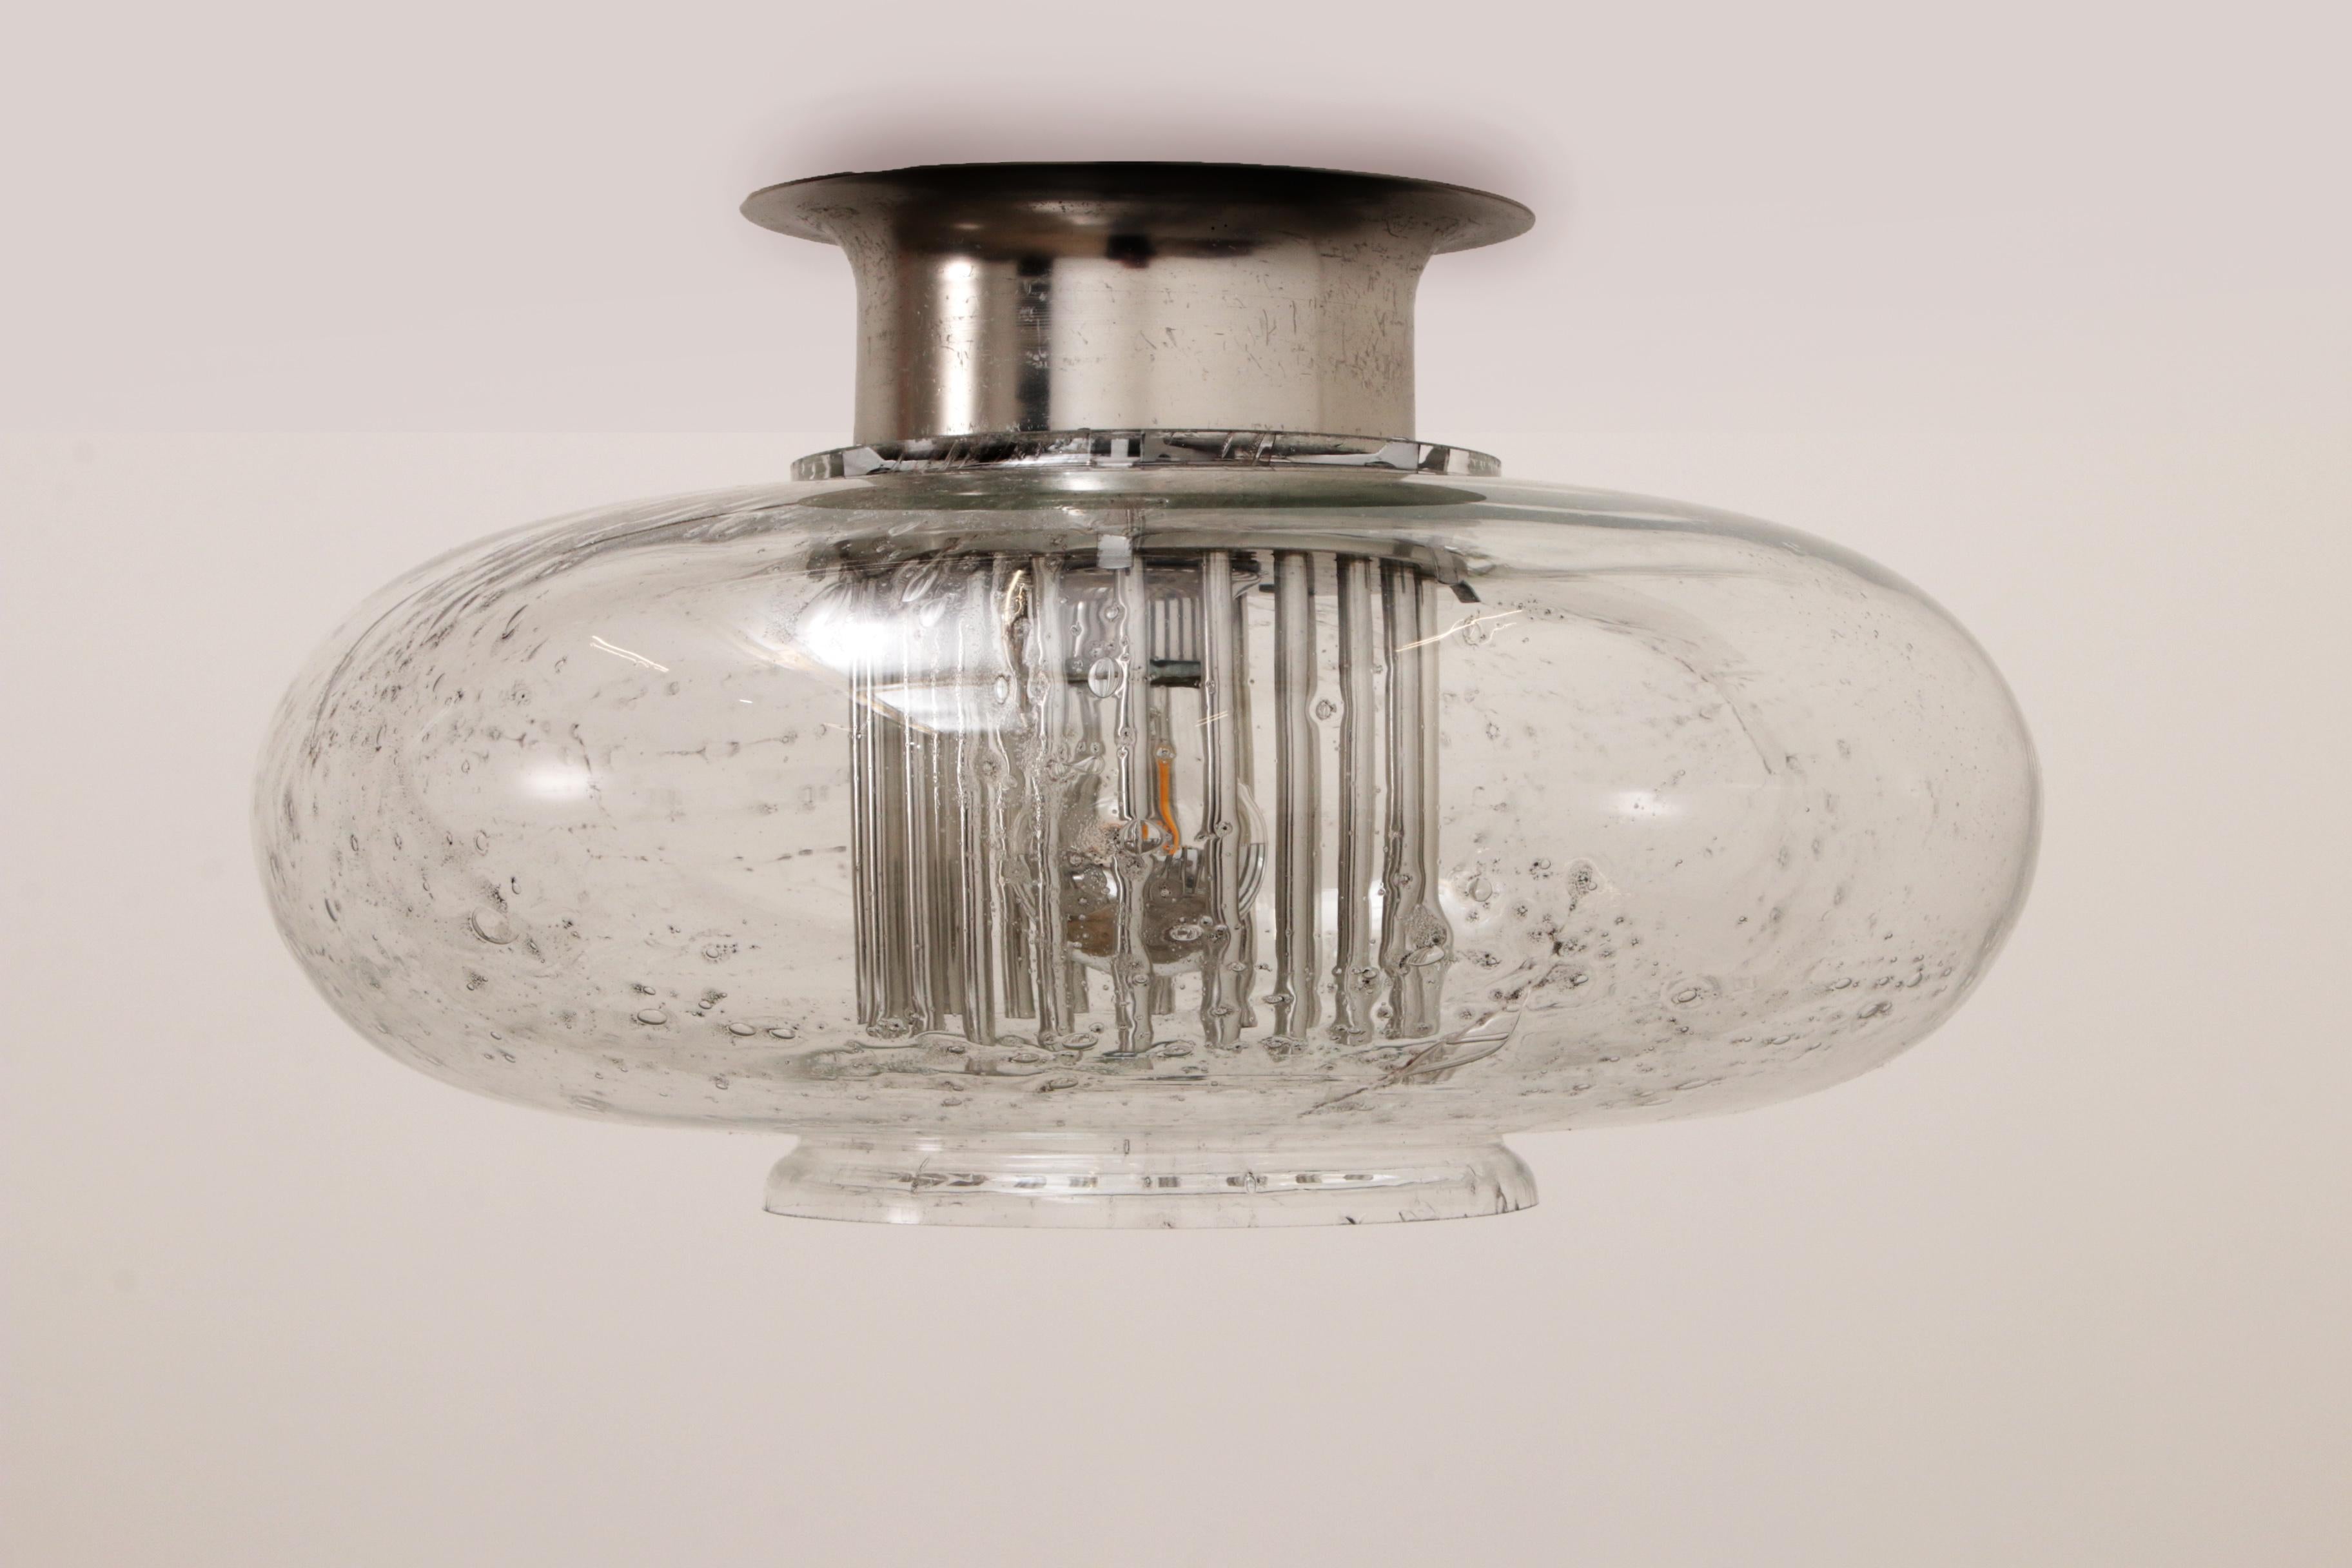 Beautiful Doria Leuchten Ceiling Lamp with Chrome Accents, 1960 Germany 1